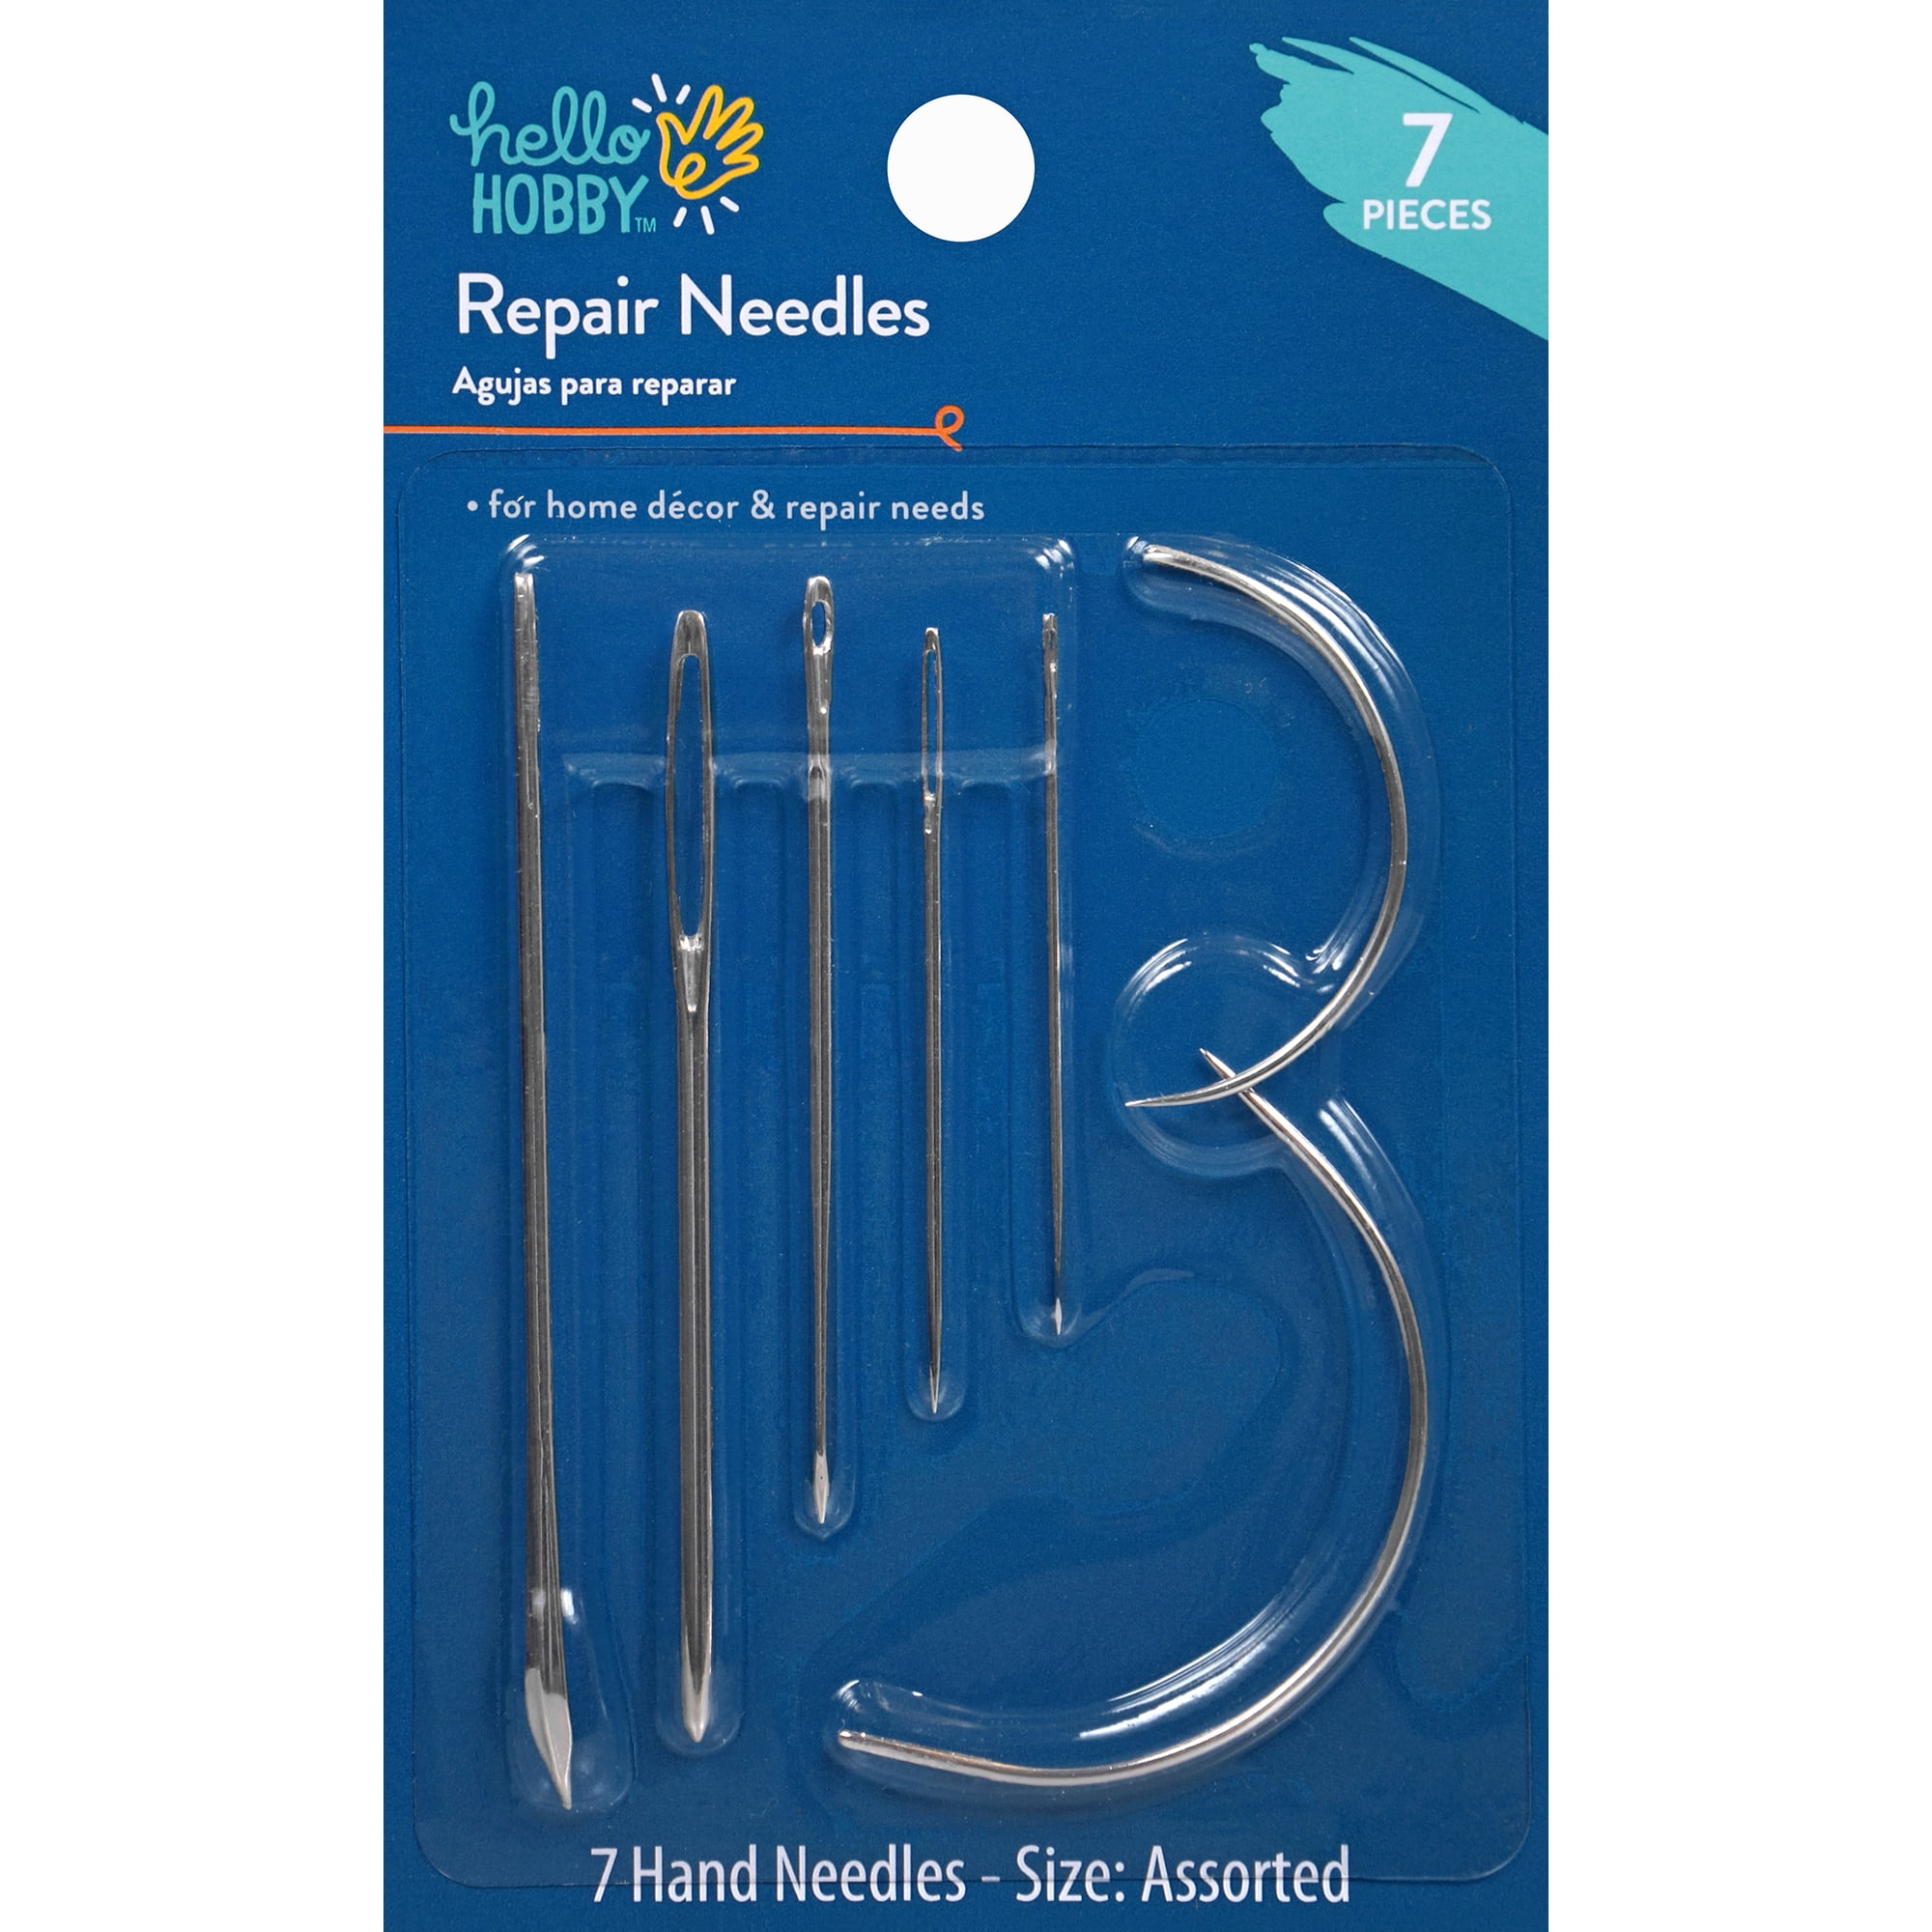 Hello Hobby Assorted Size Home Repair Needles (7 Piece)